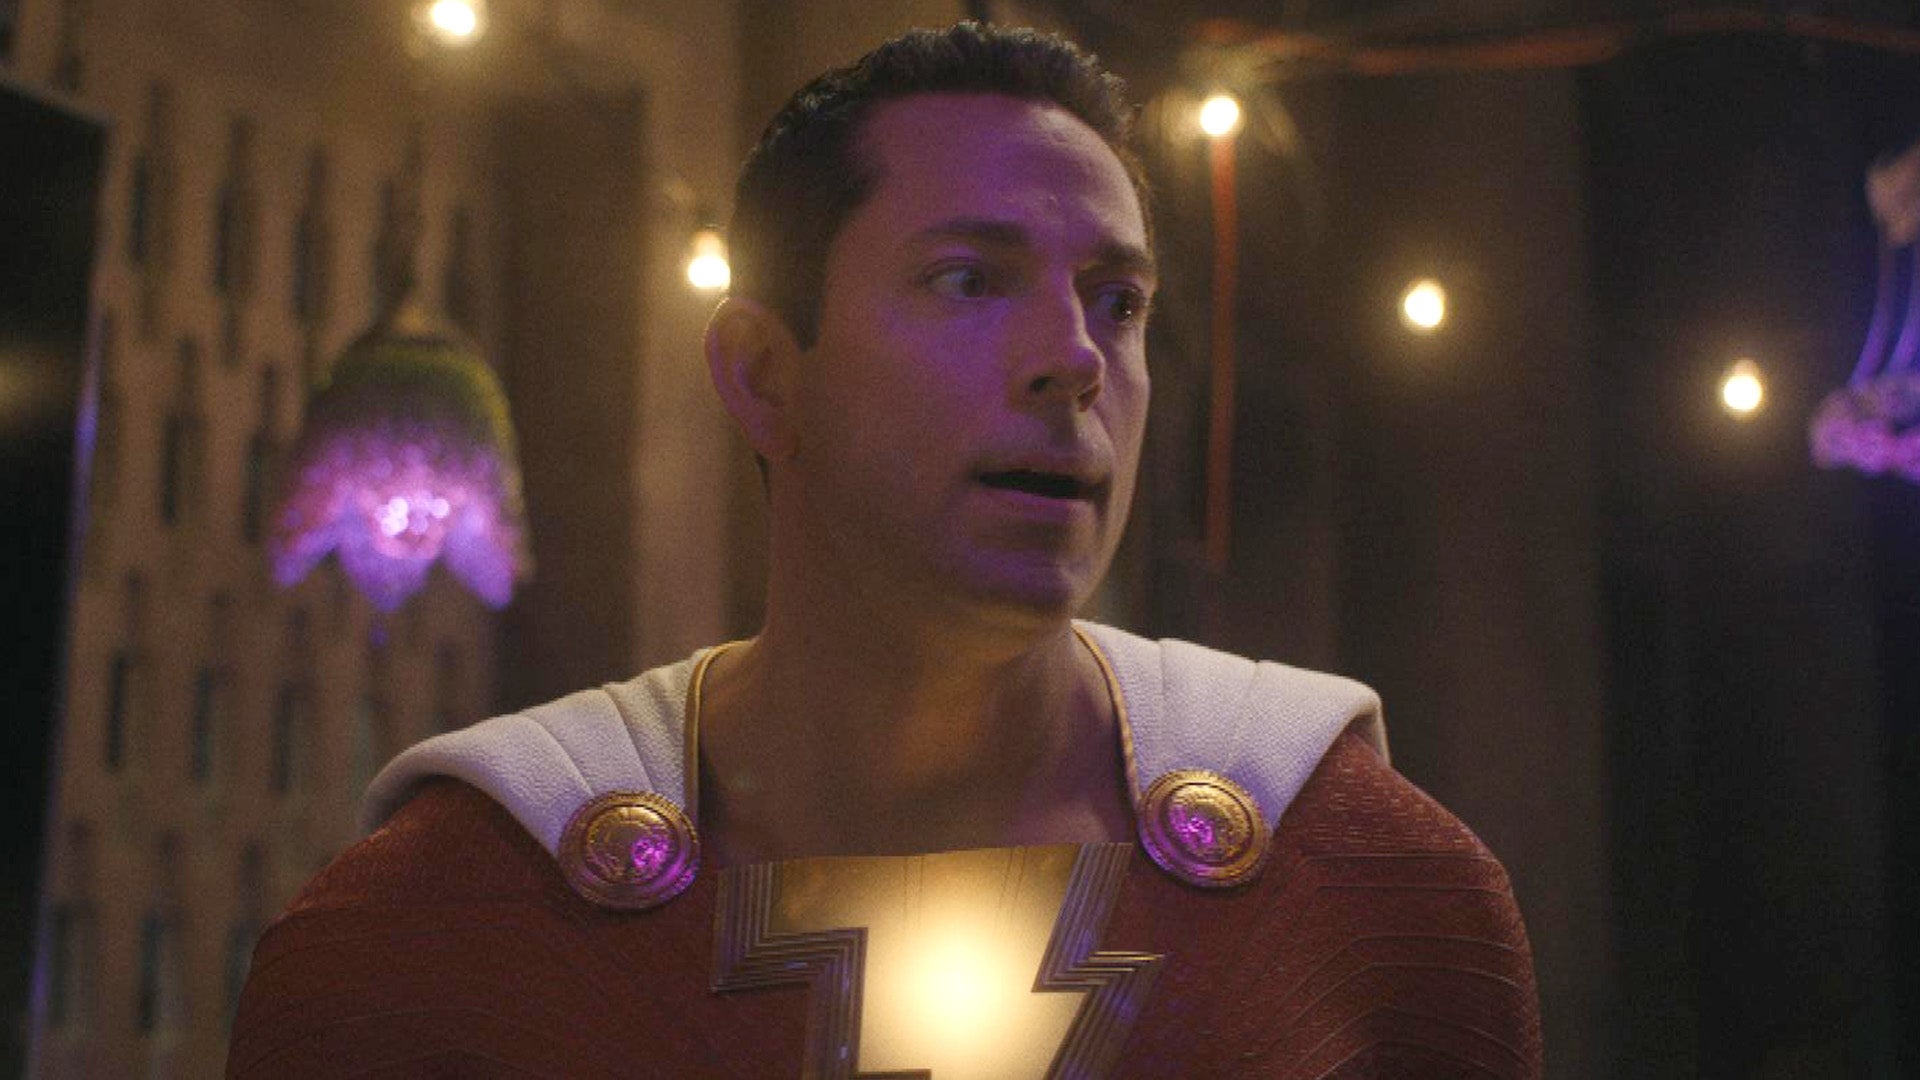 Shazam! Fury Of The Gods' Just Released An Official Trailer And